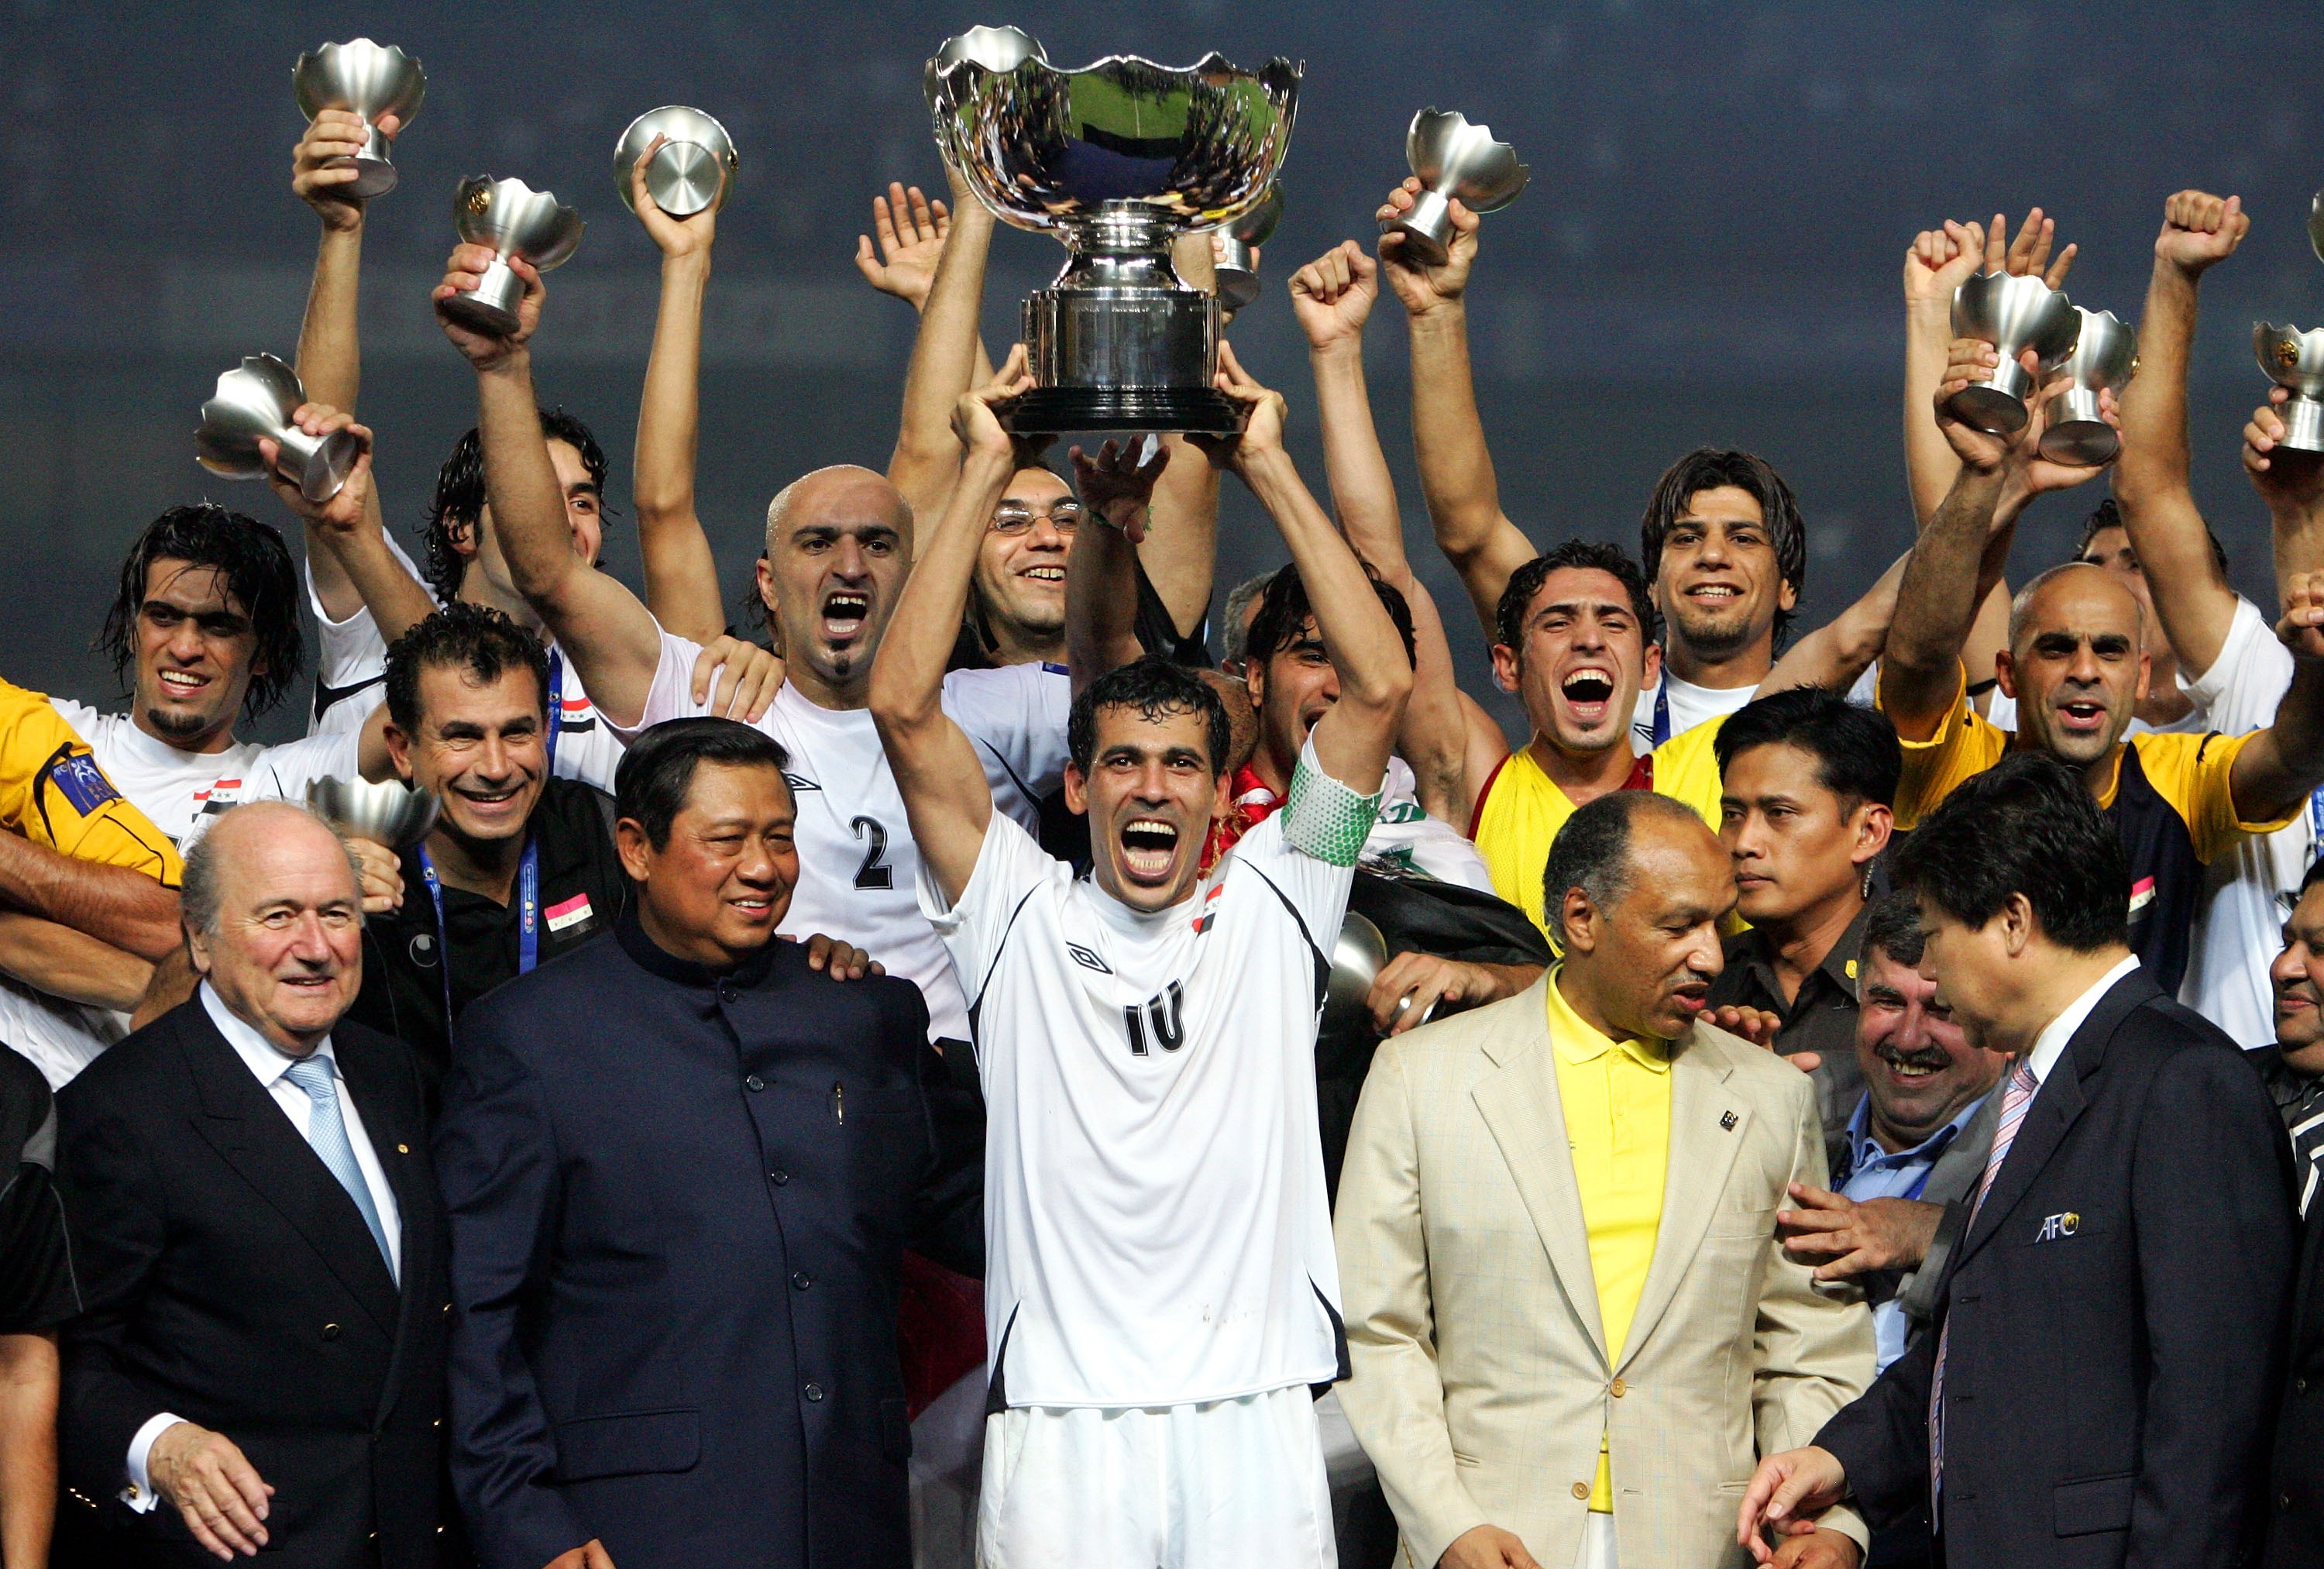 Iraq captain Younis Mahmoud lifts the trophy that helped unite a nation